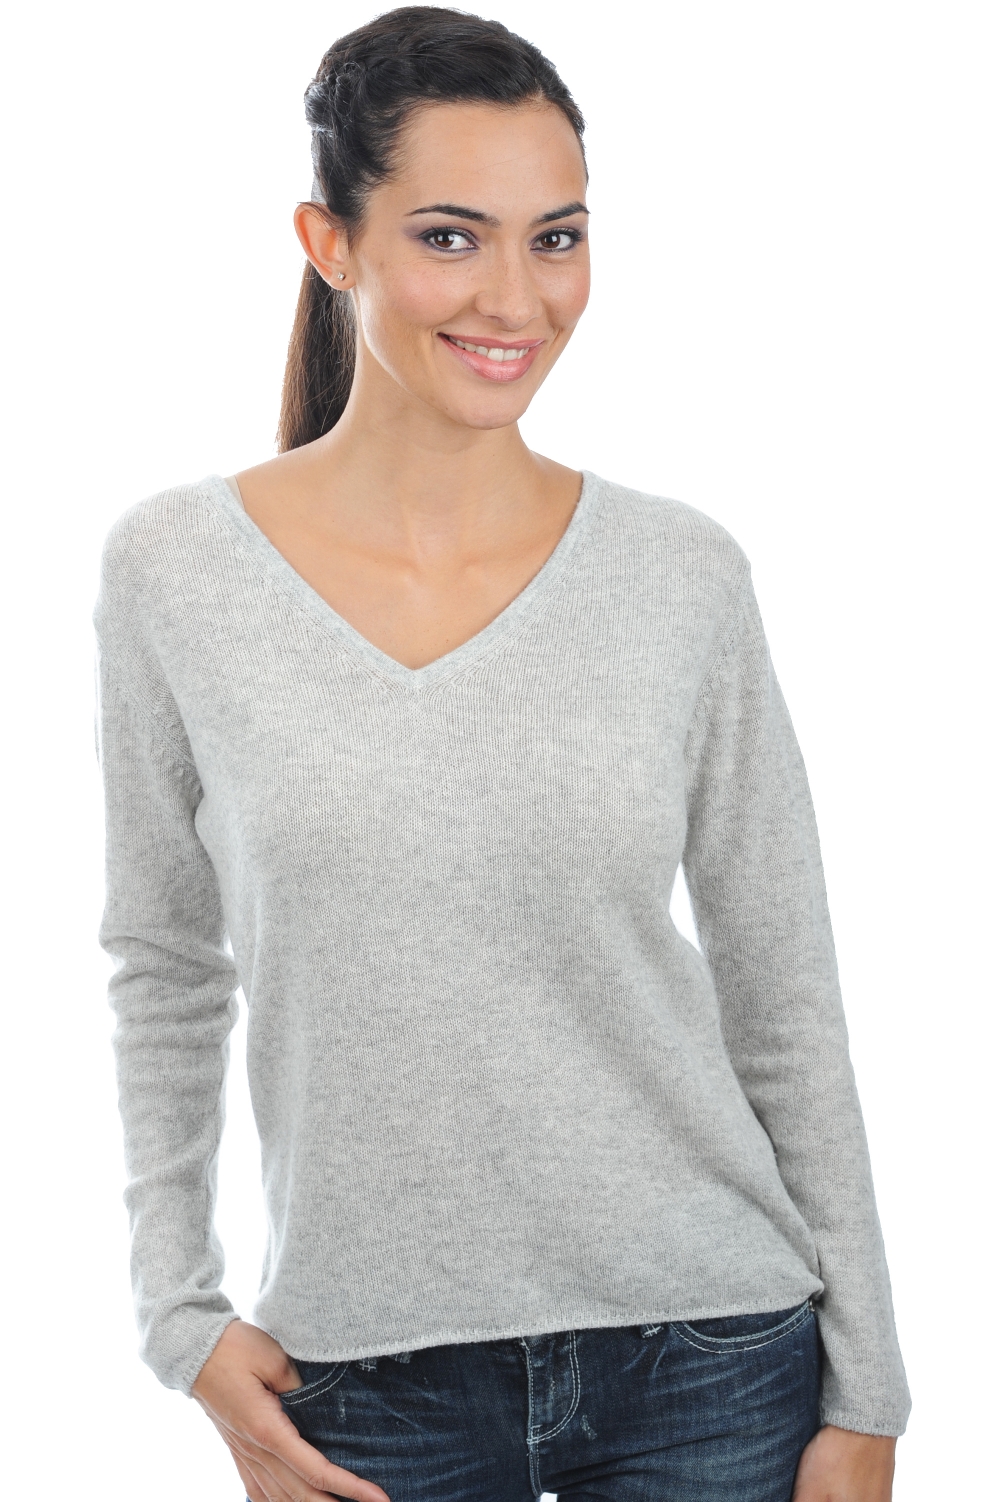 Cashmere ladies basic sweaters at low prices flavie flanelle chine xs